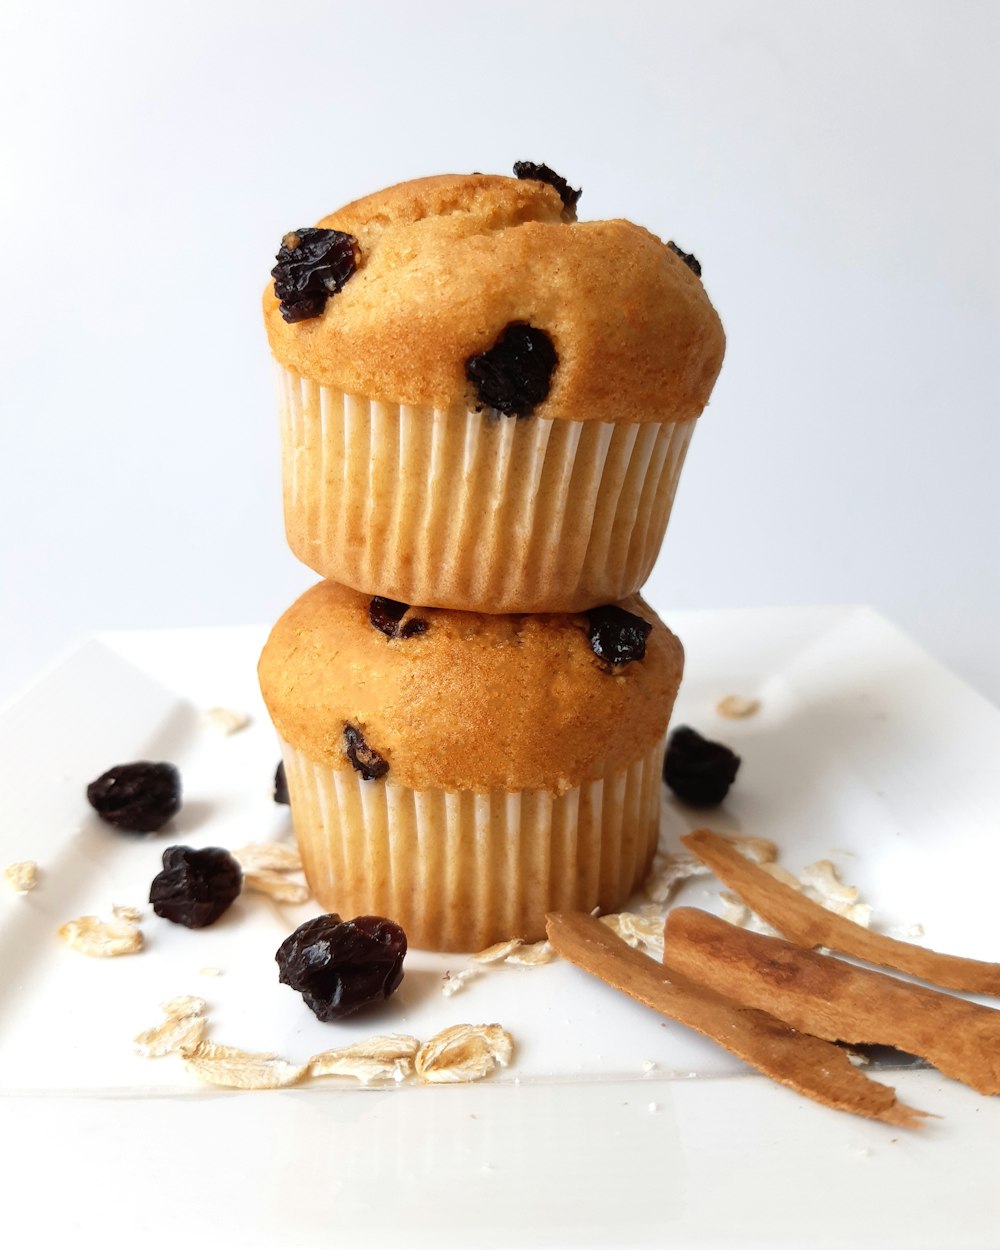 three muffins stacked on top of each other on a plate